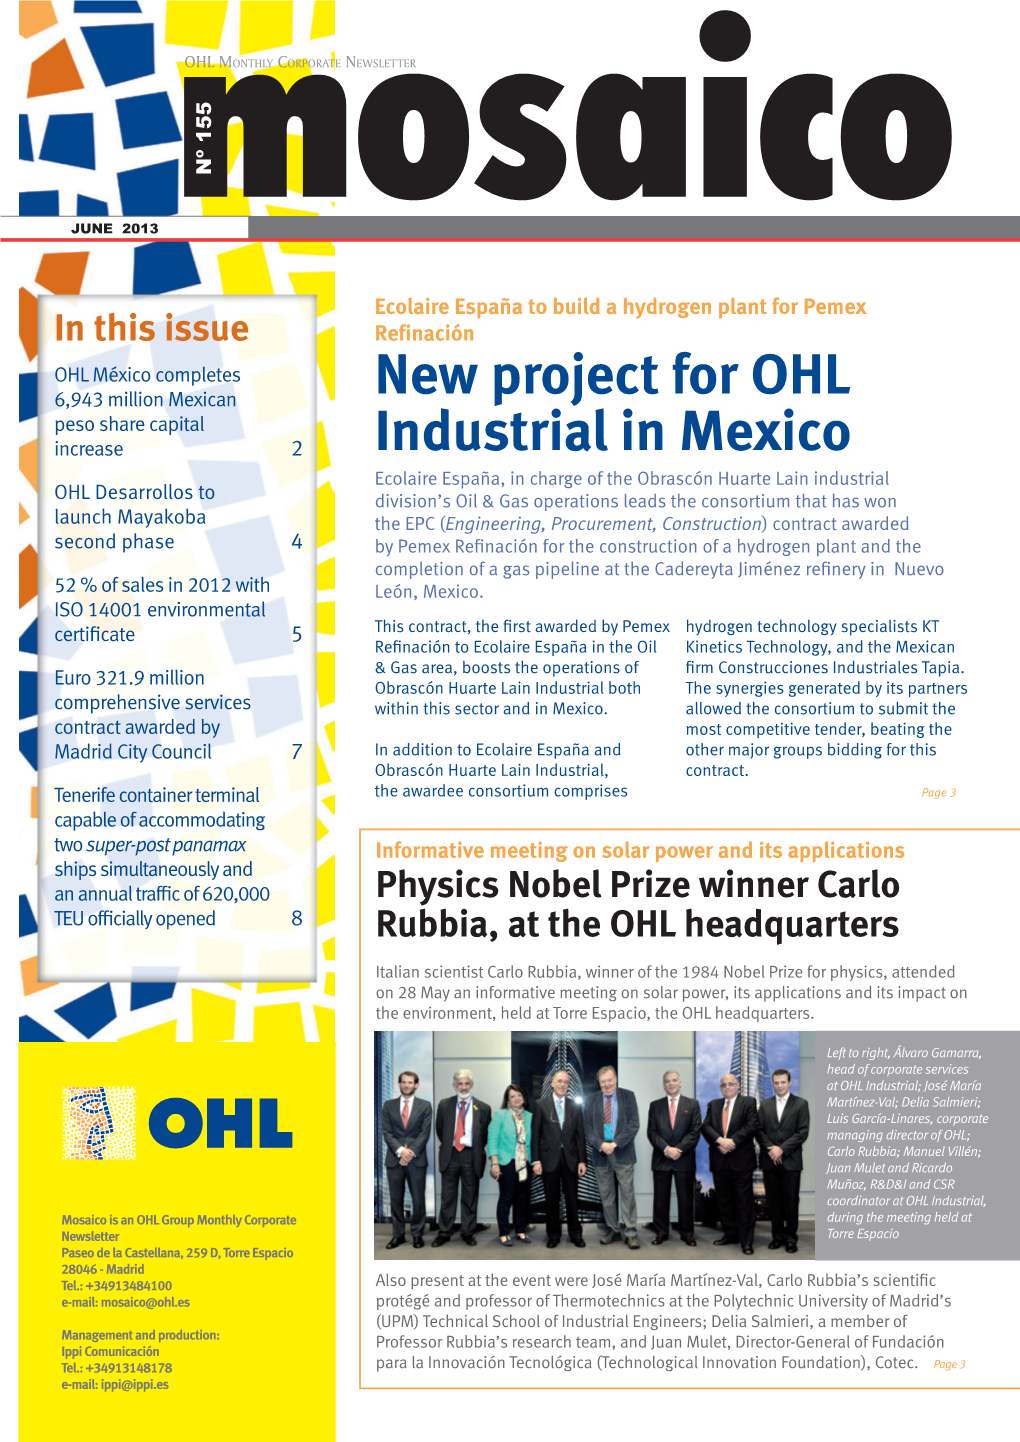 New Project for OHL Industrial in Mexico